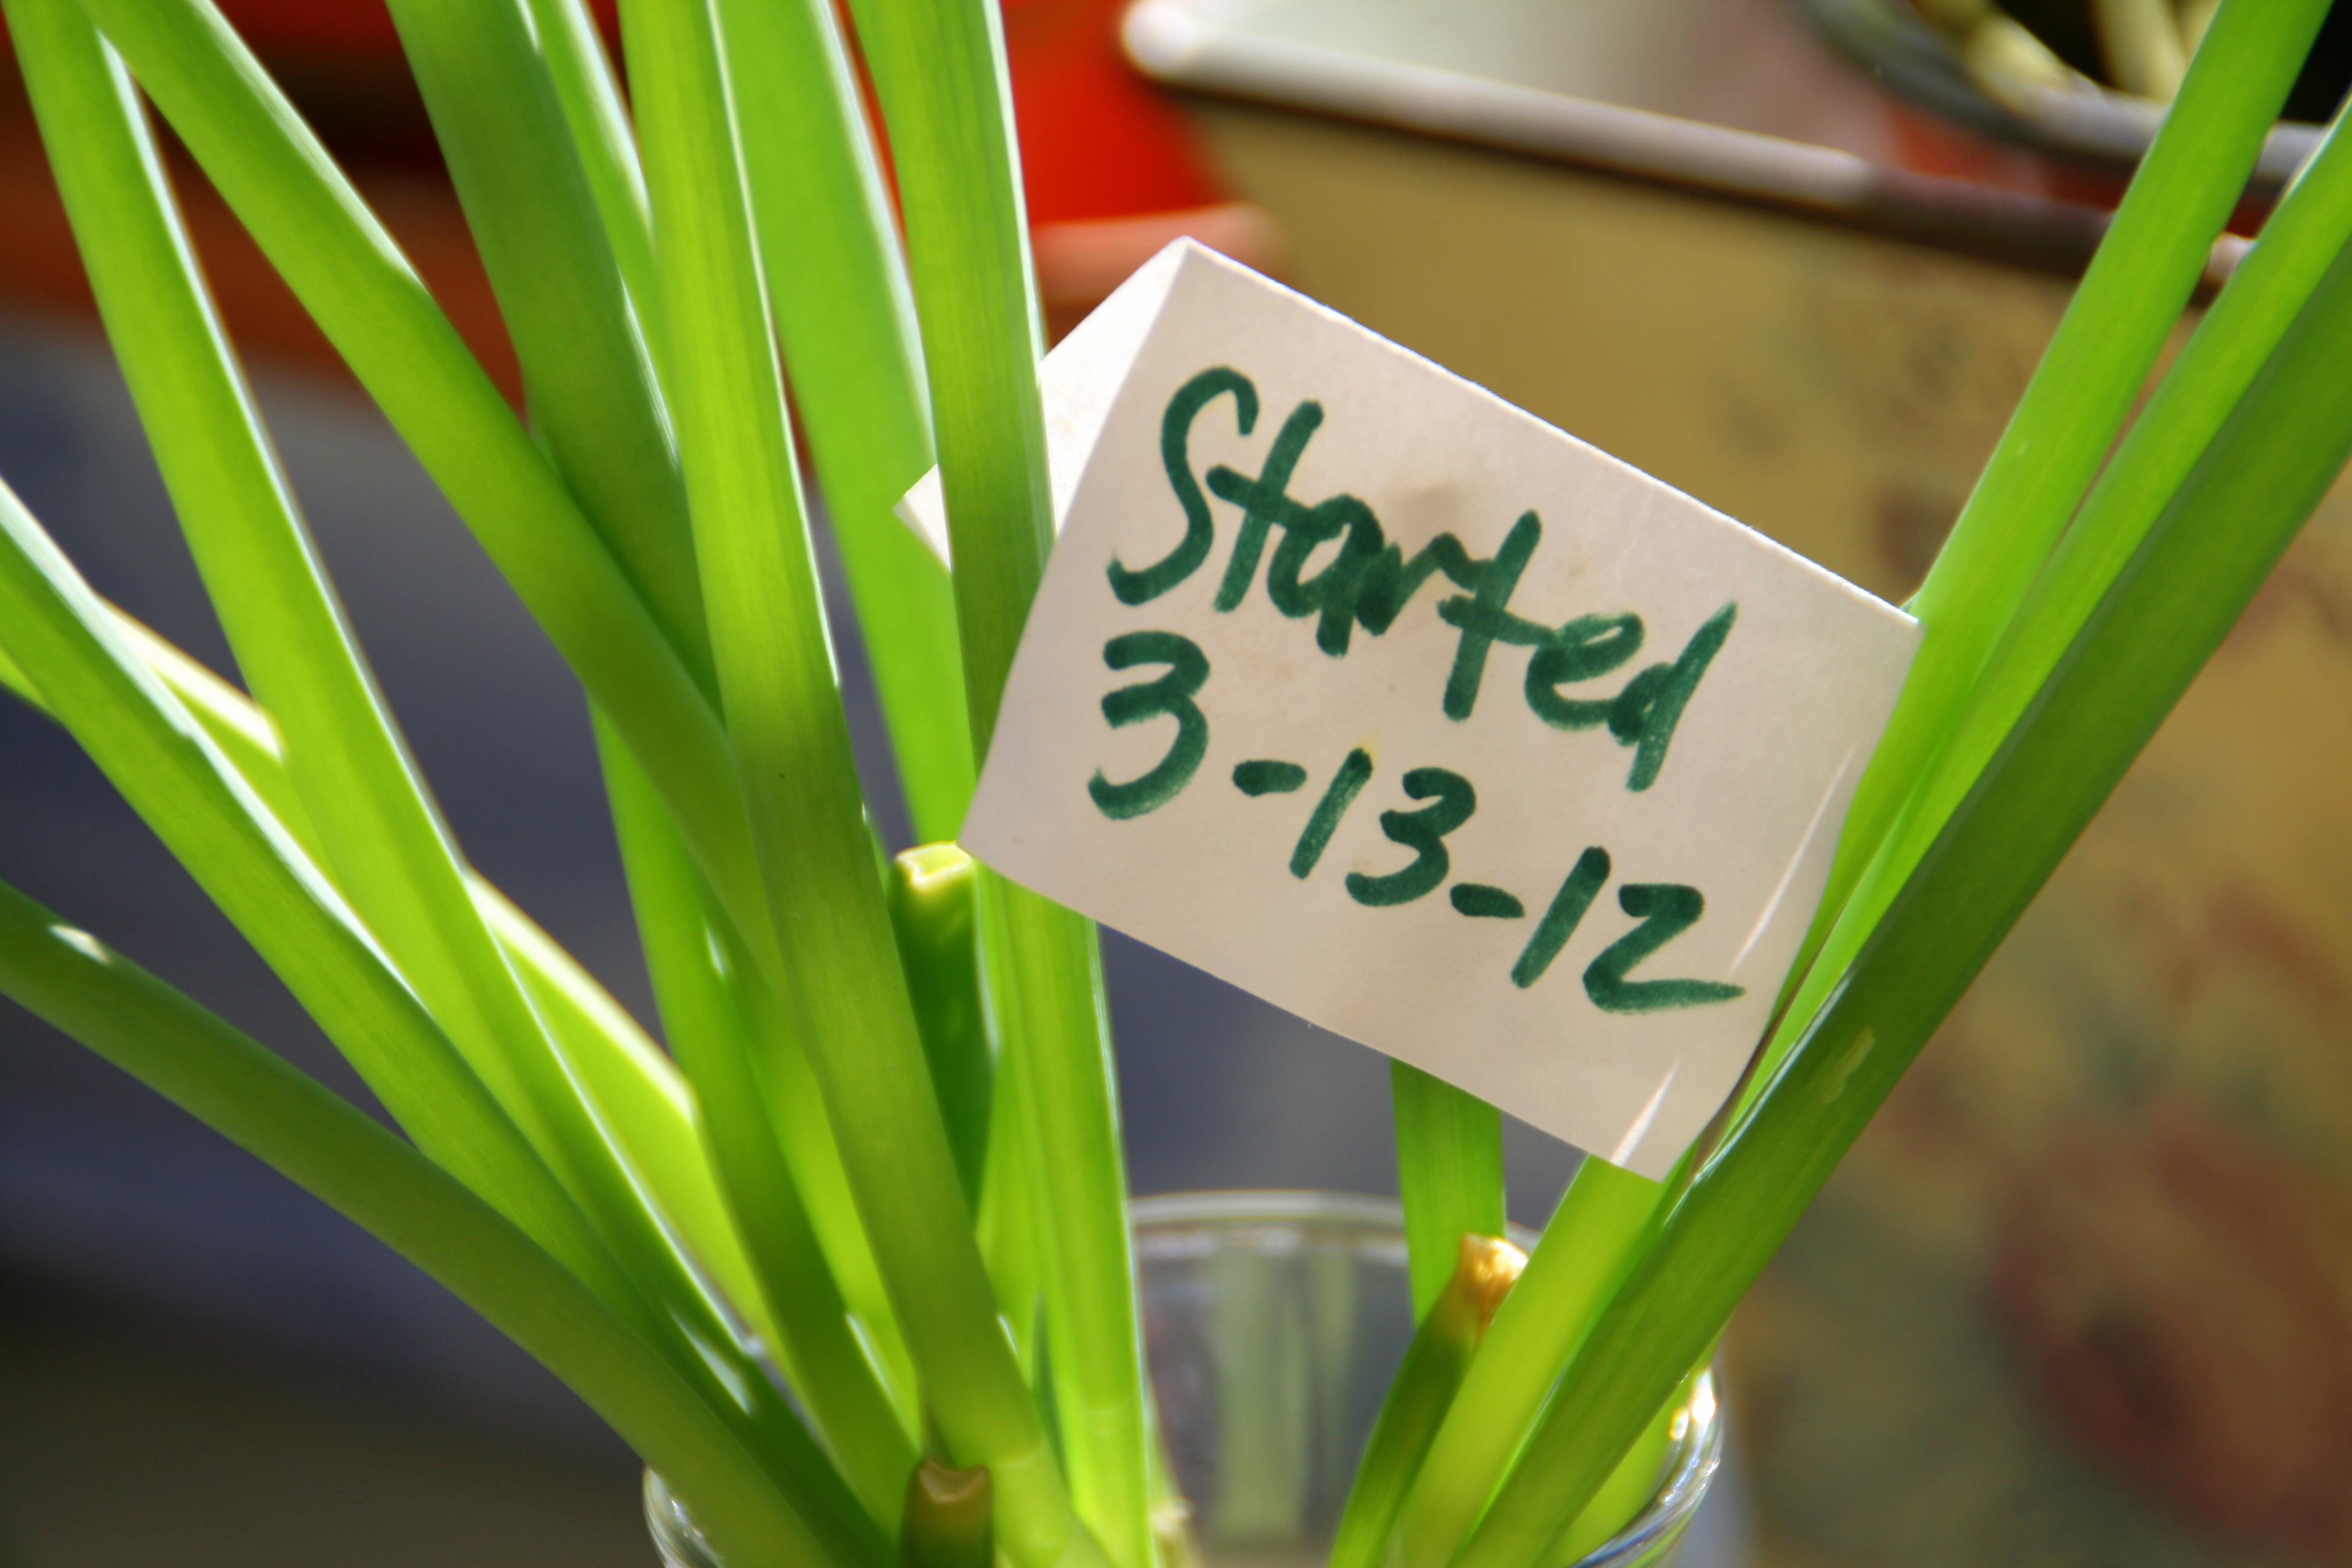 Sign and date on scallions in window